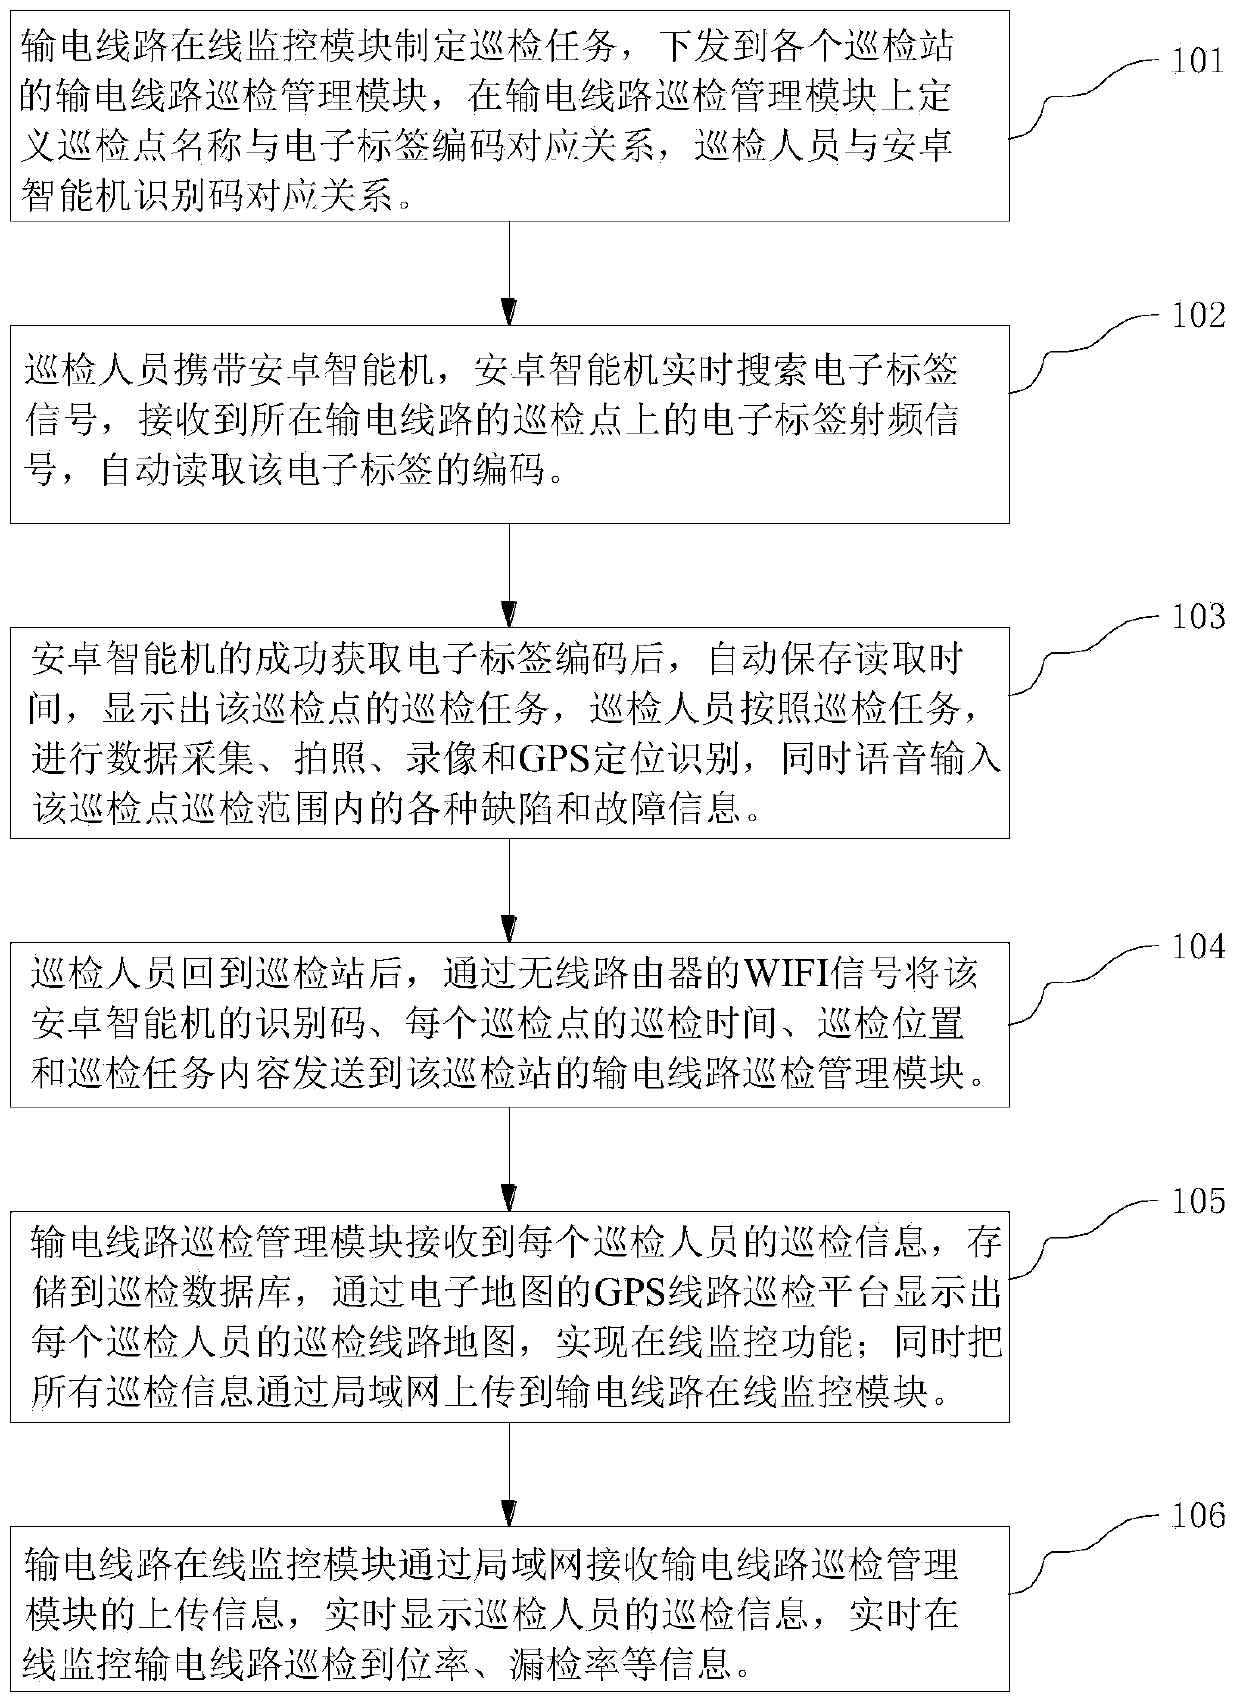 Power transmission line inspection arrival rate online monitoring system and method based on electronic tag